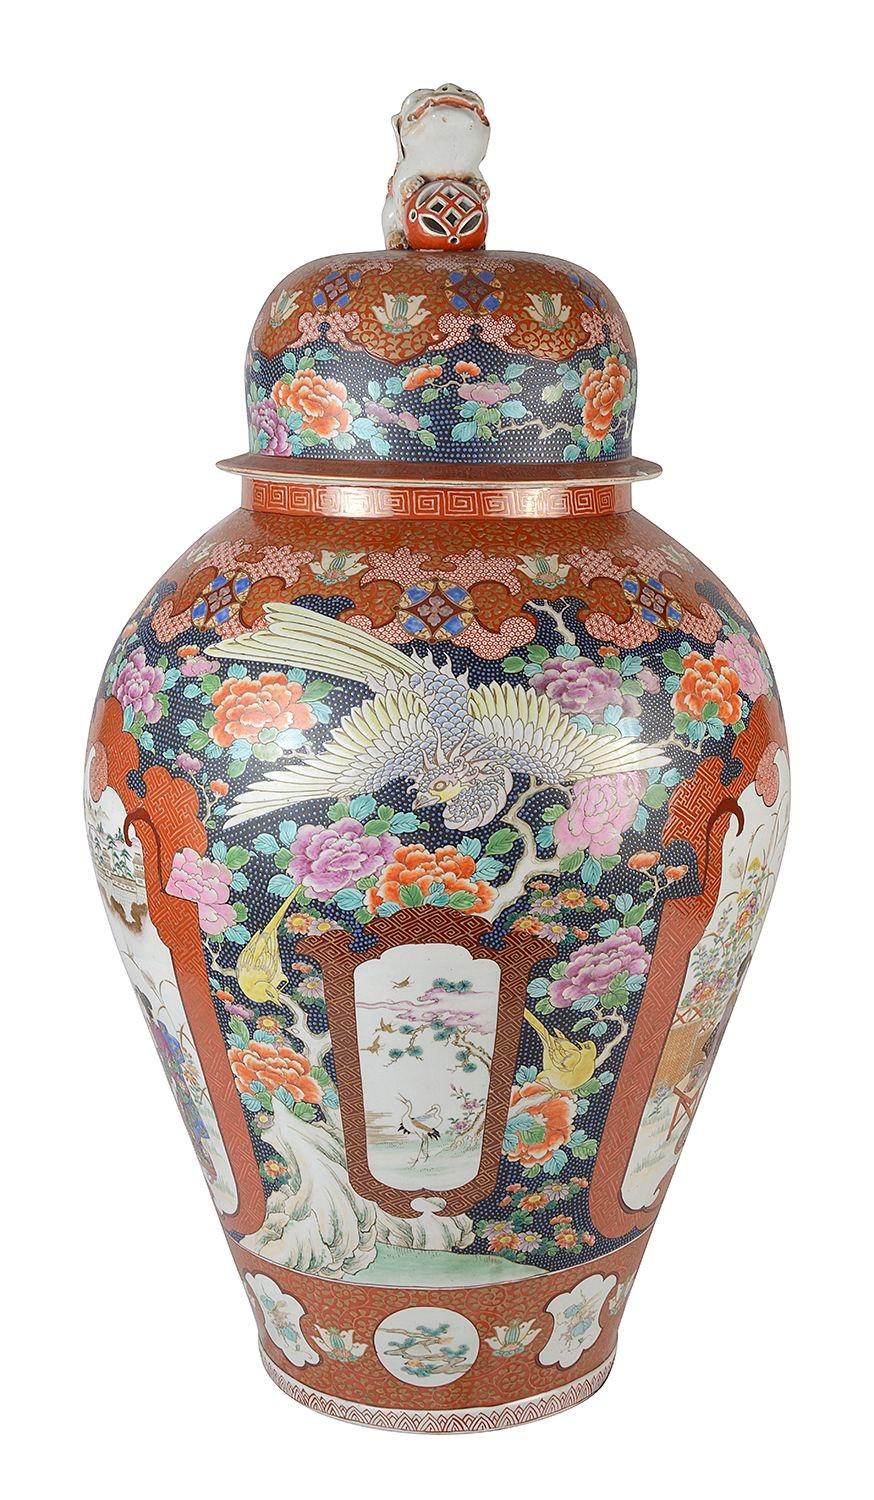 A very impressive 19th Century Japanese lidded Imari vase, having wonderful hand painted classical motif decoration, a Foo dog finial to the lid, inset panels depicting Geisha girls, exotic birds and flowers.

Batch 76 N/H